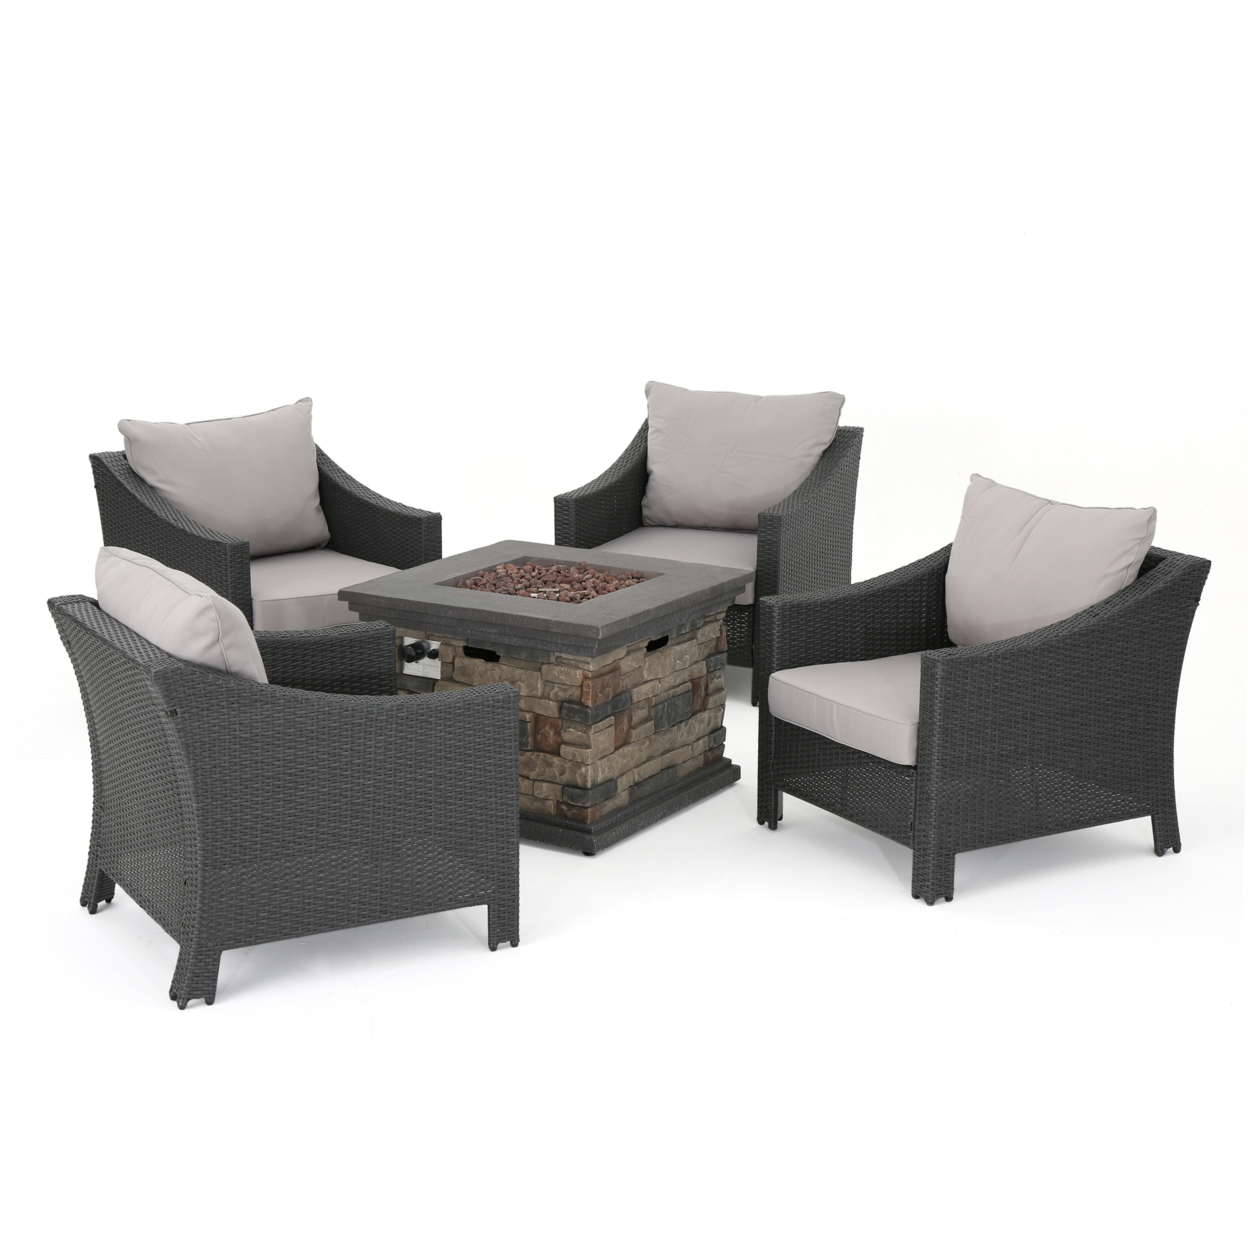 Andrew Outdoor 5 Piece Gray Wicker Chat Set With Stone Finished Fire Pit - Teal